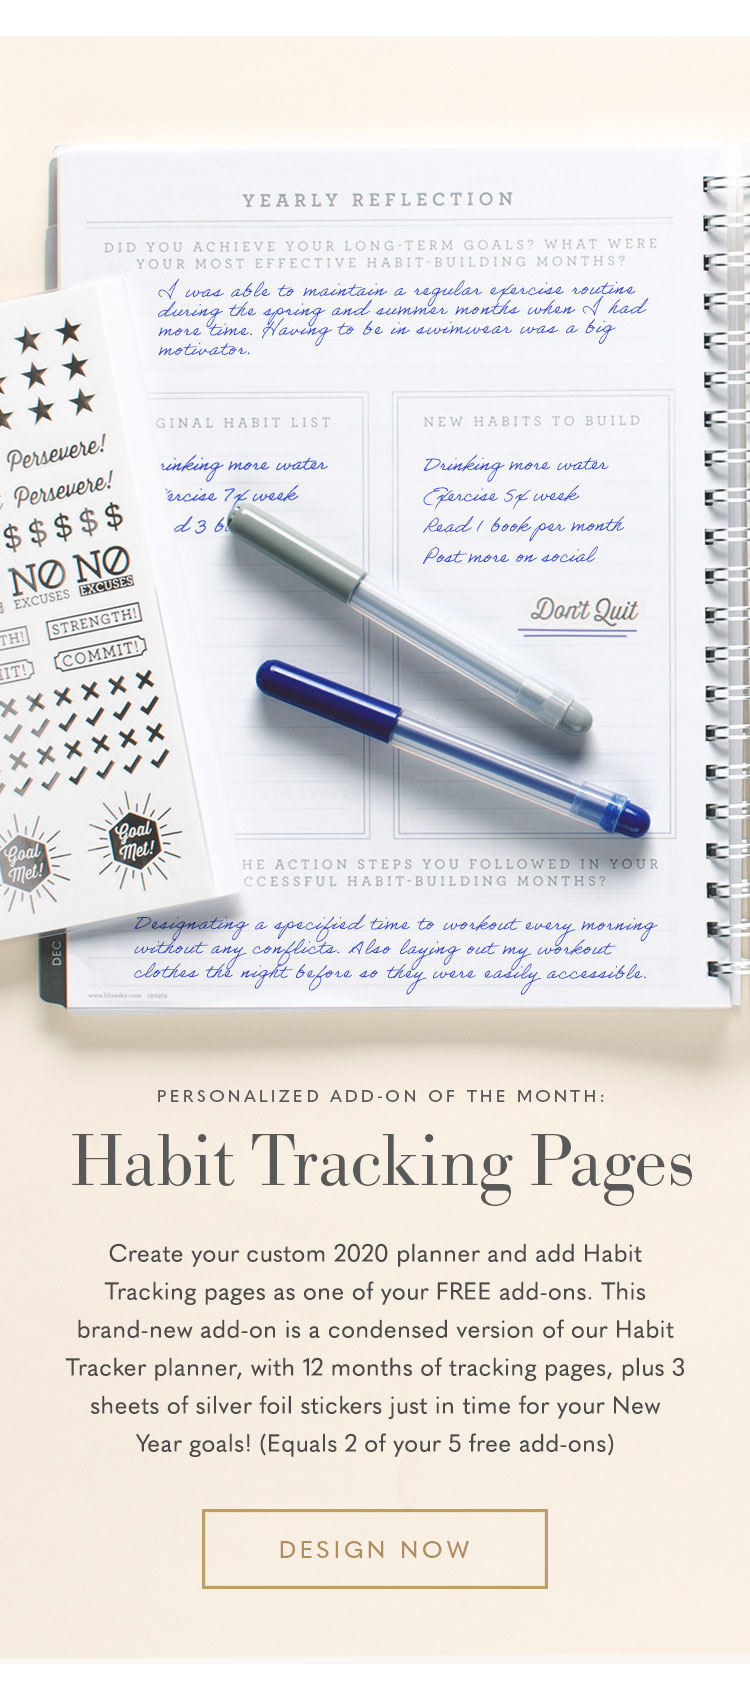 Habit Tracking Pages